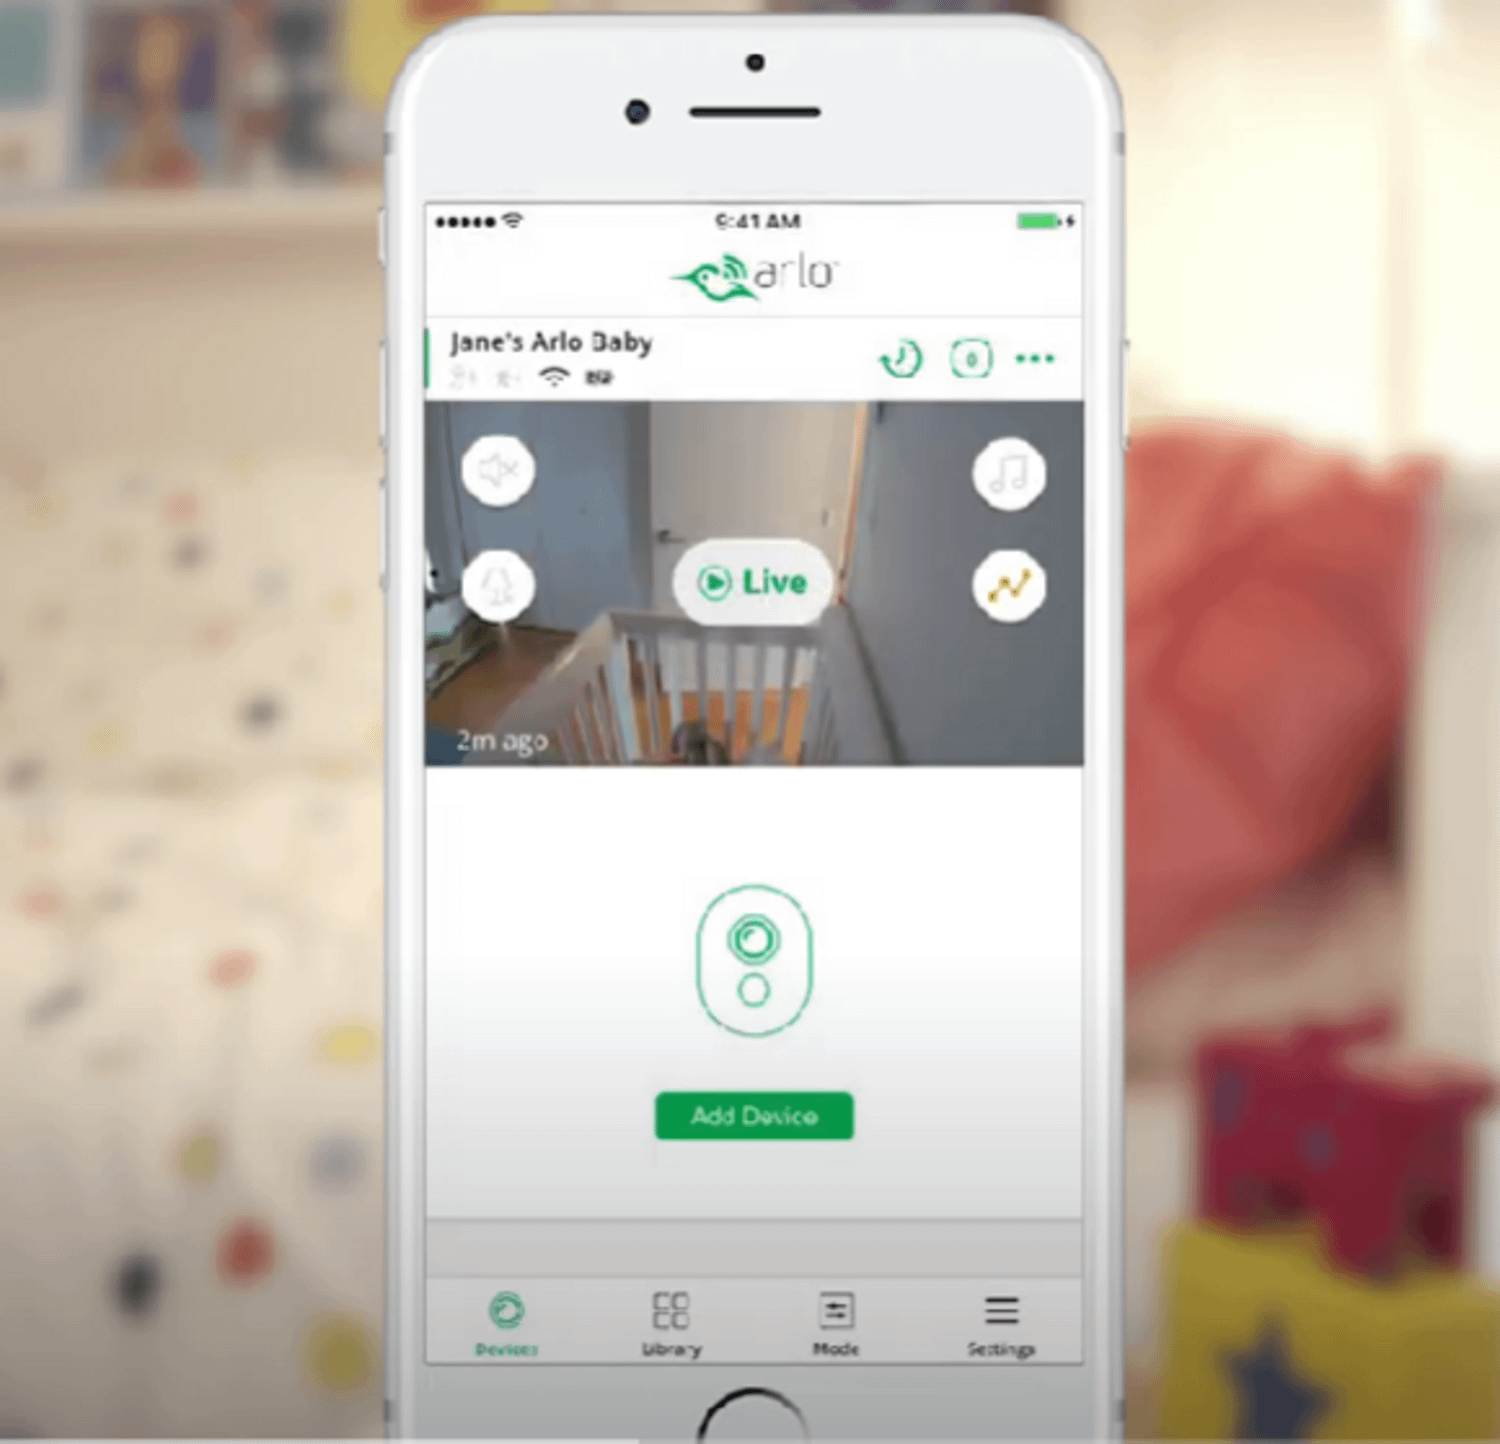 The look of the Arlo app on the mobile phone